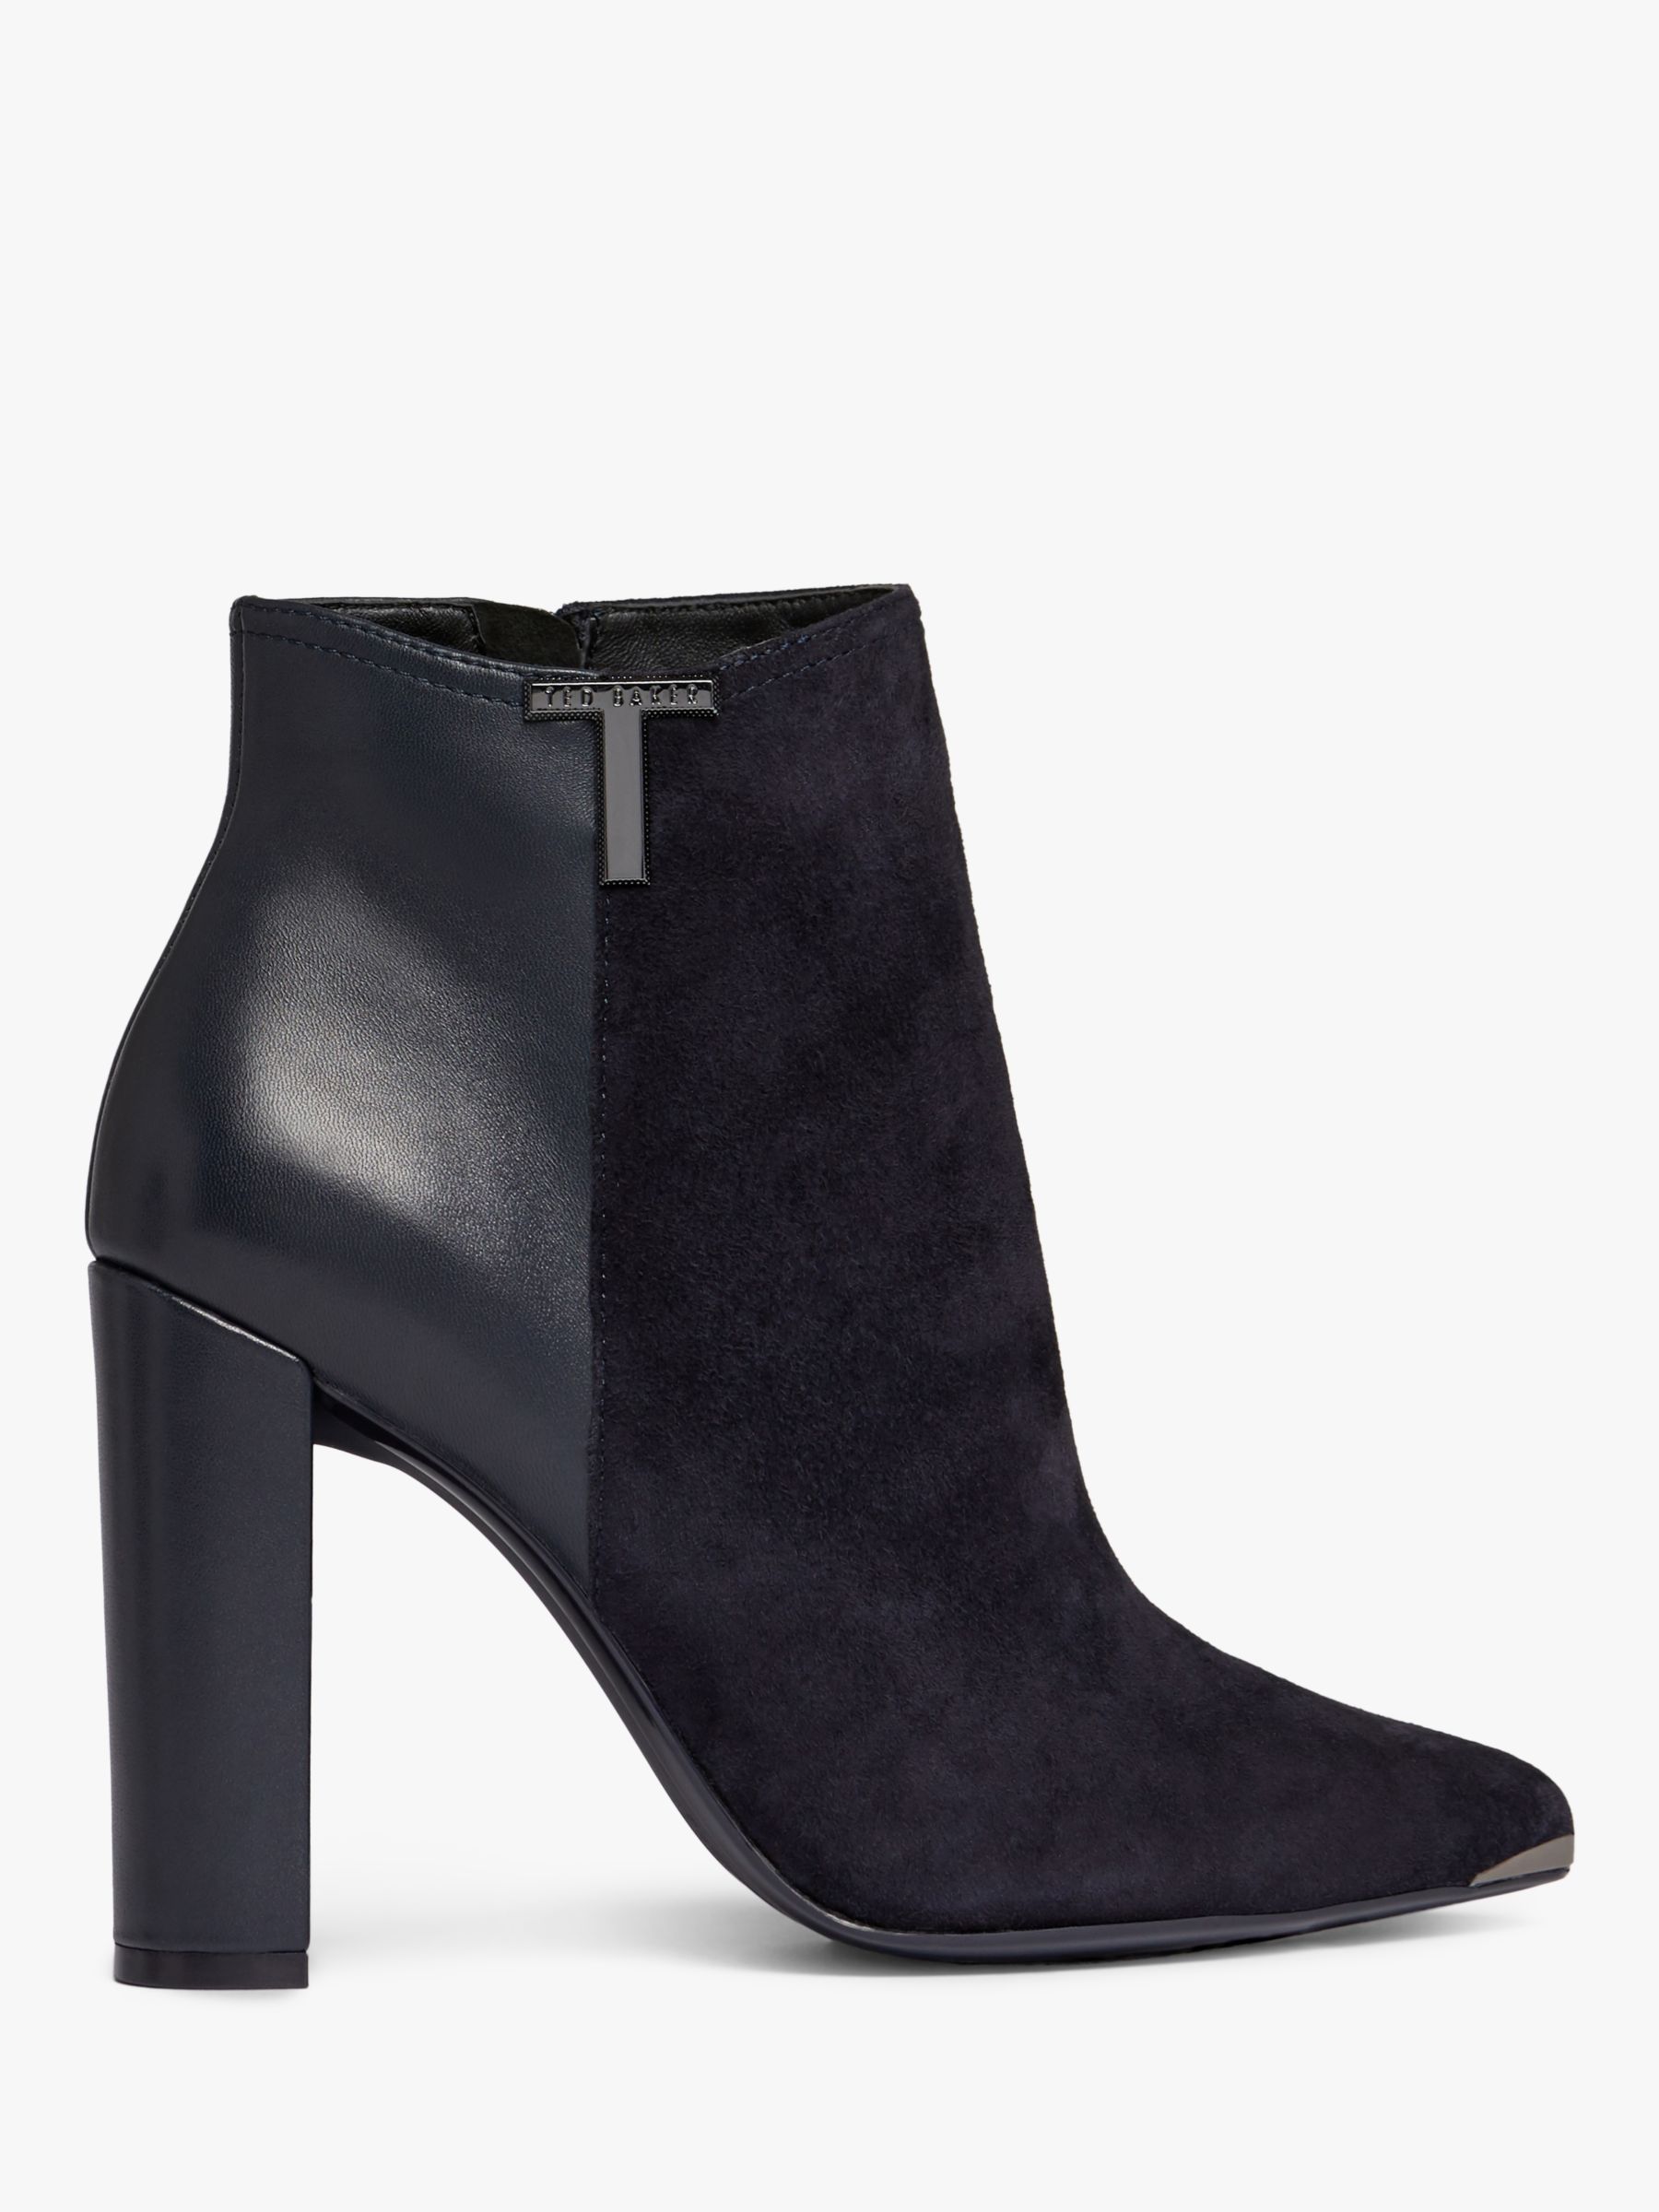 Ted Baker Inala Leather Suede Point Toe Ankle Boots at John Lewis ...